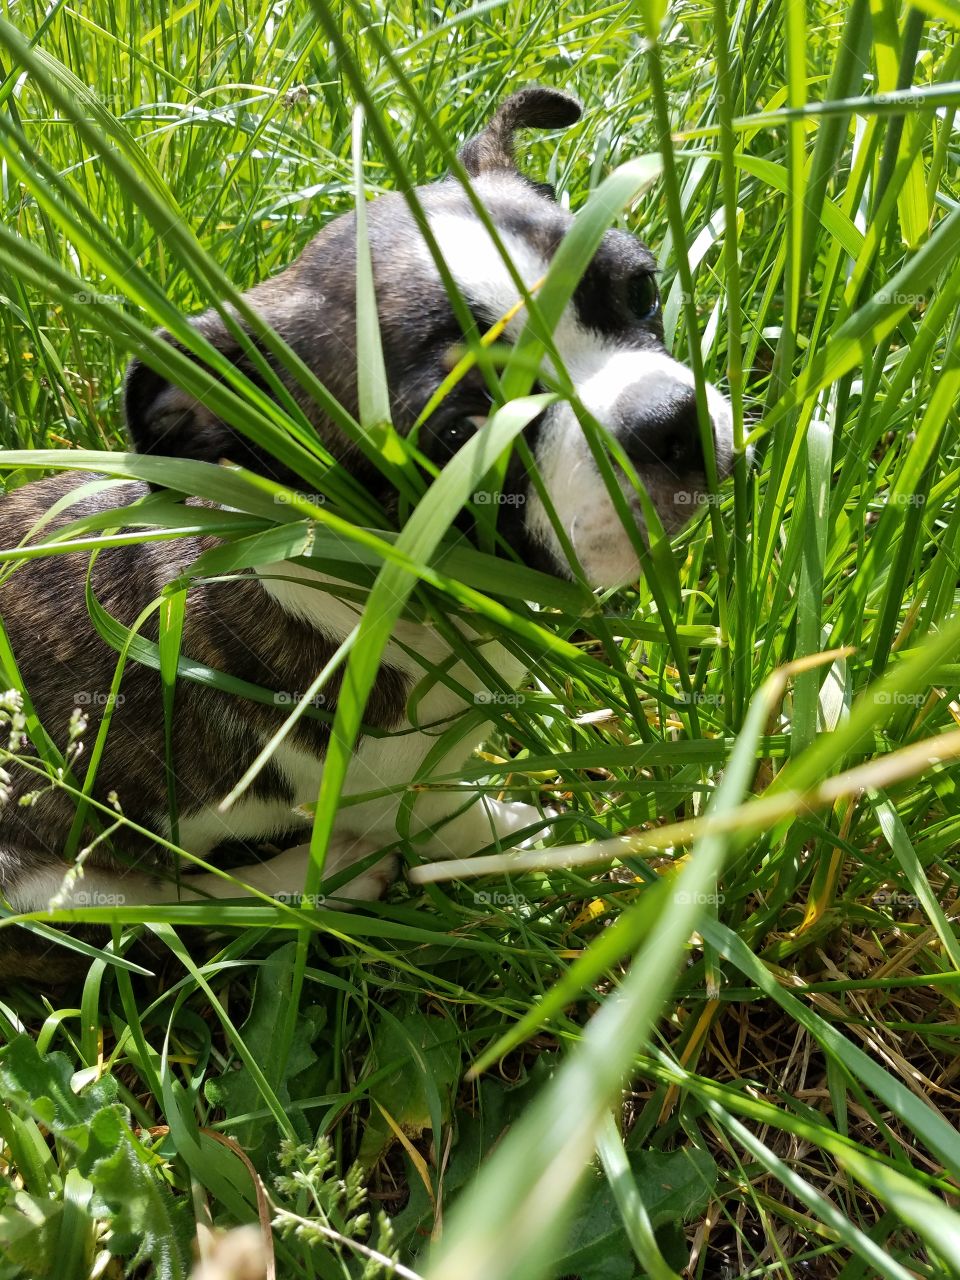 Mr Pepe playing in the grass